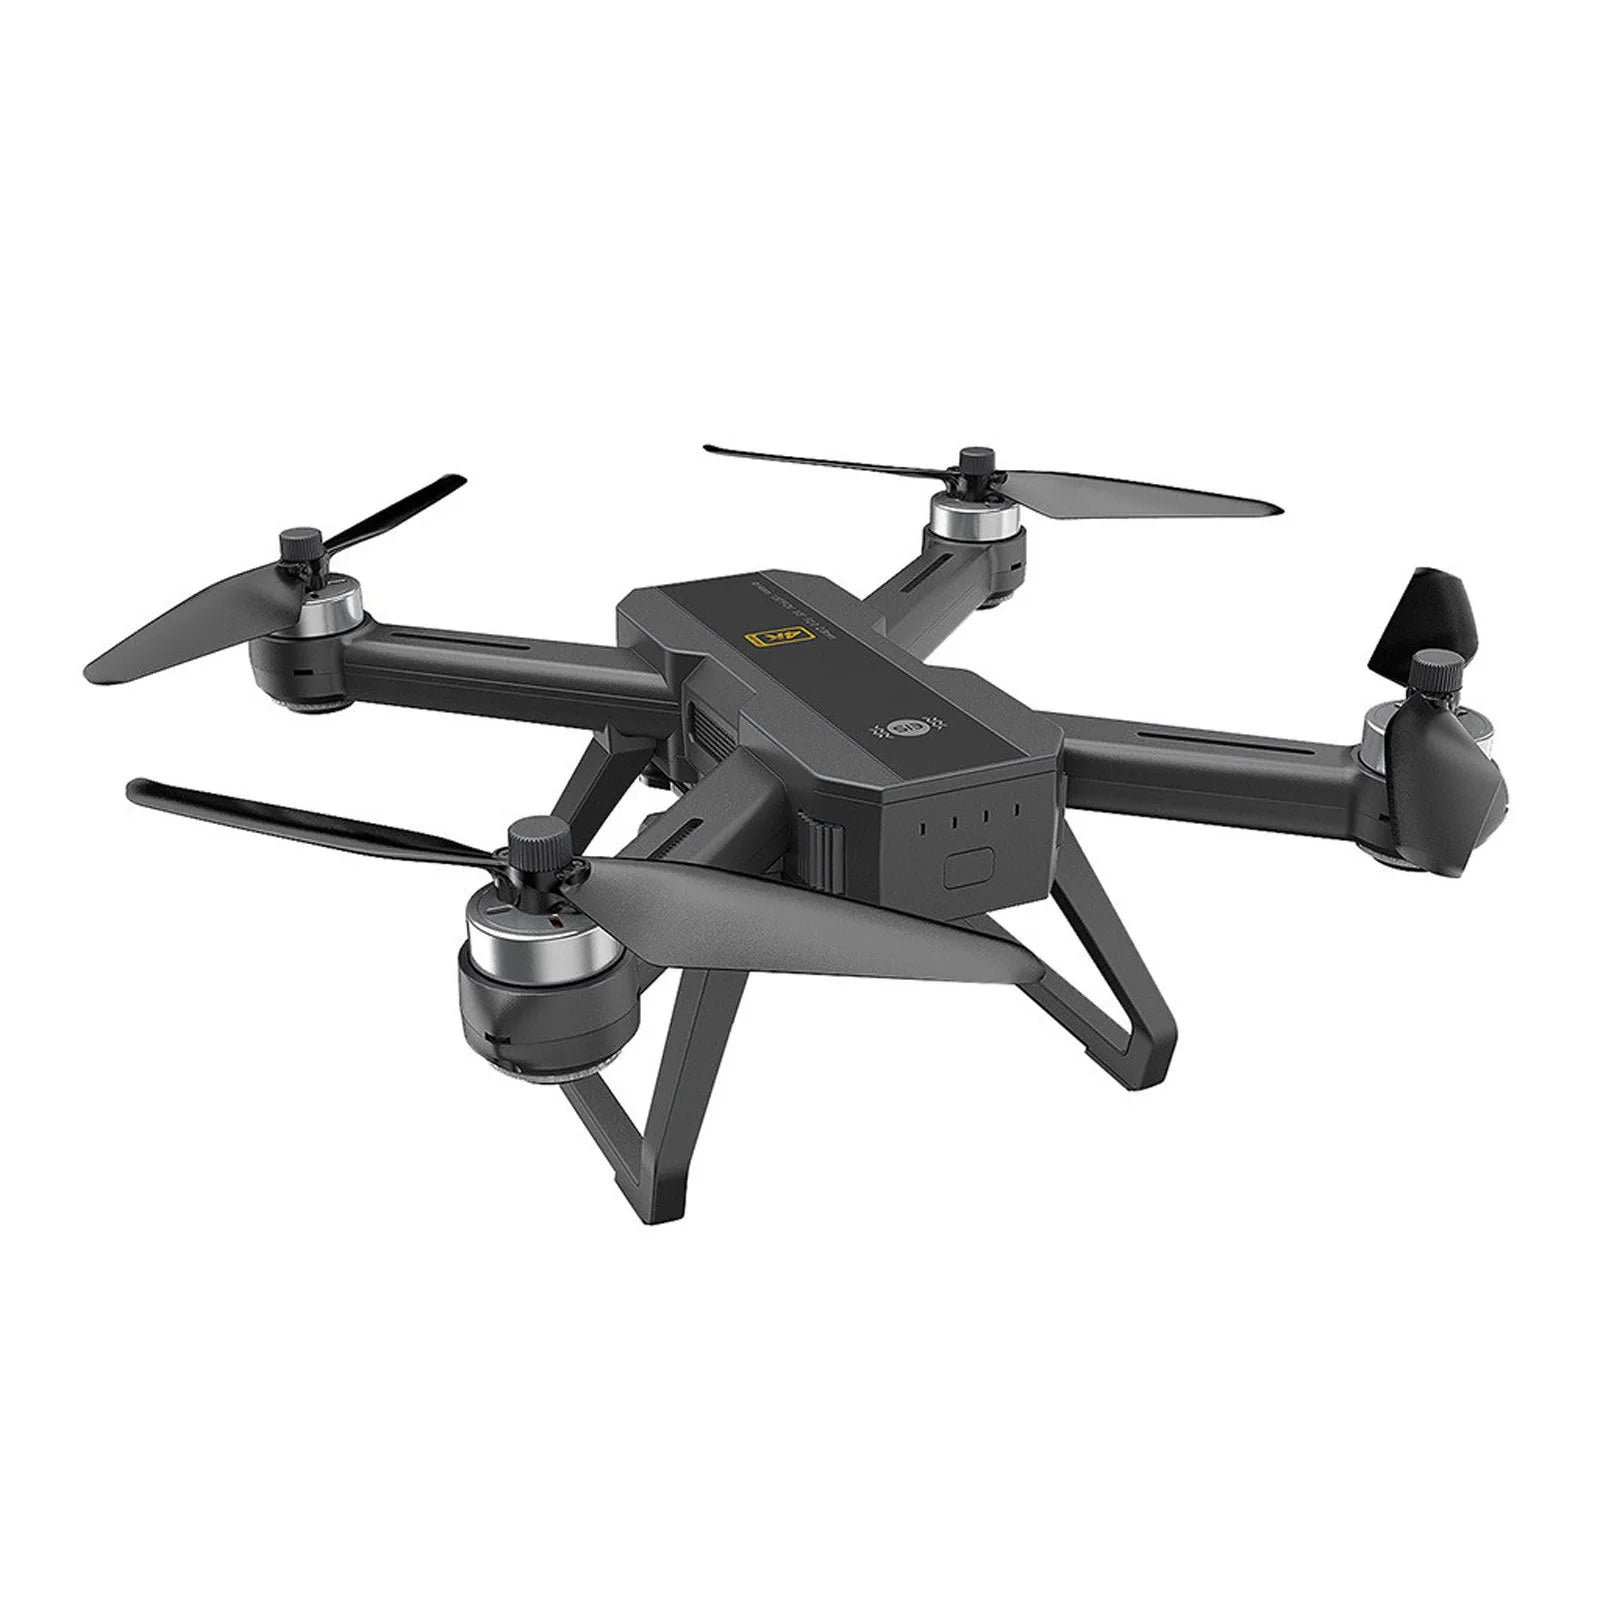 Mjx Bugs 20 Drone, Follow me:The drone's camera will lock on your mobile phone . when using this